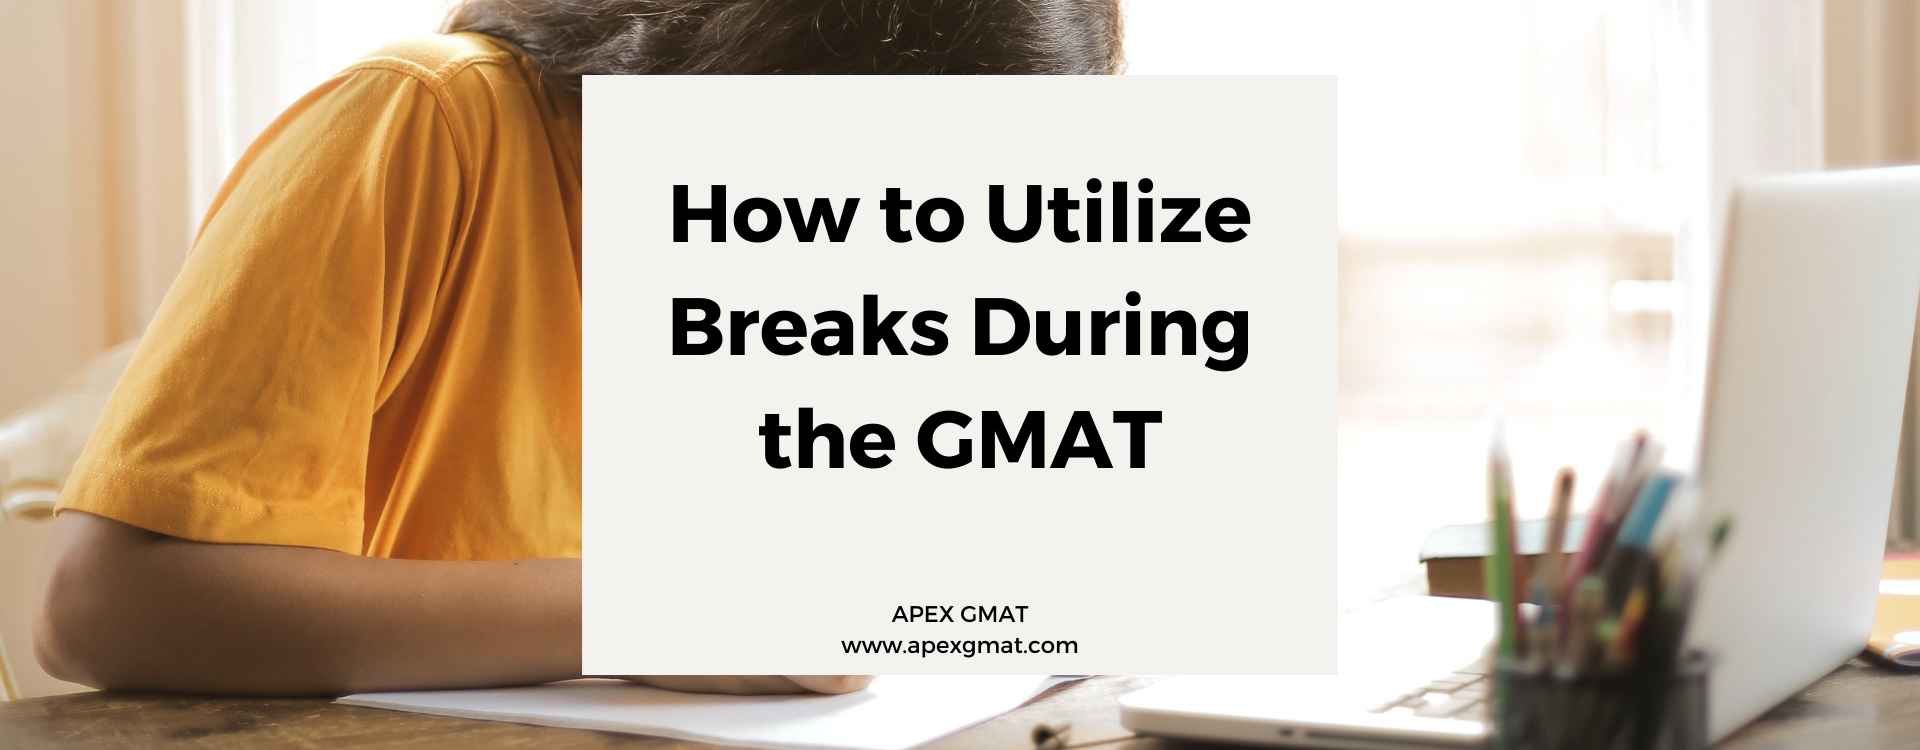 GMAT Success: How to Utilize Breaks During the GMAT